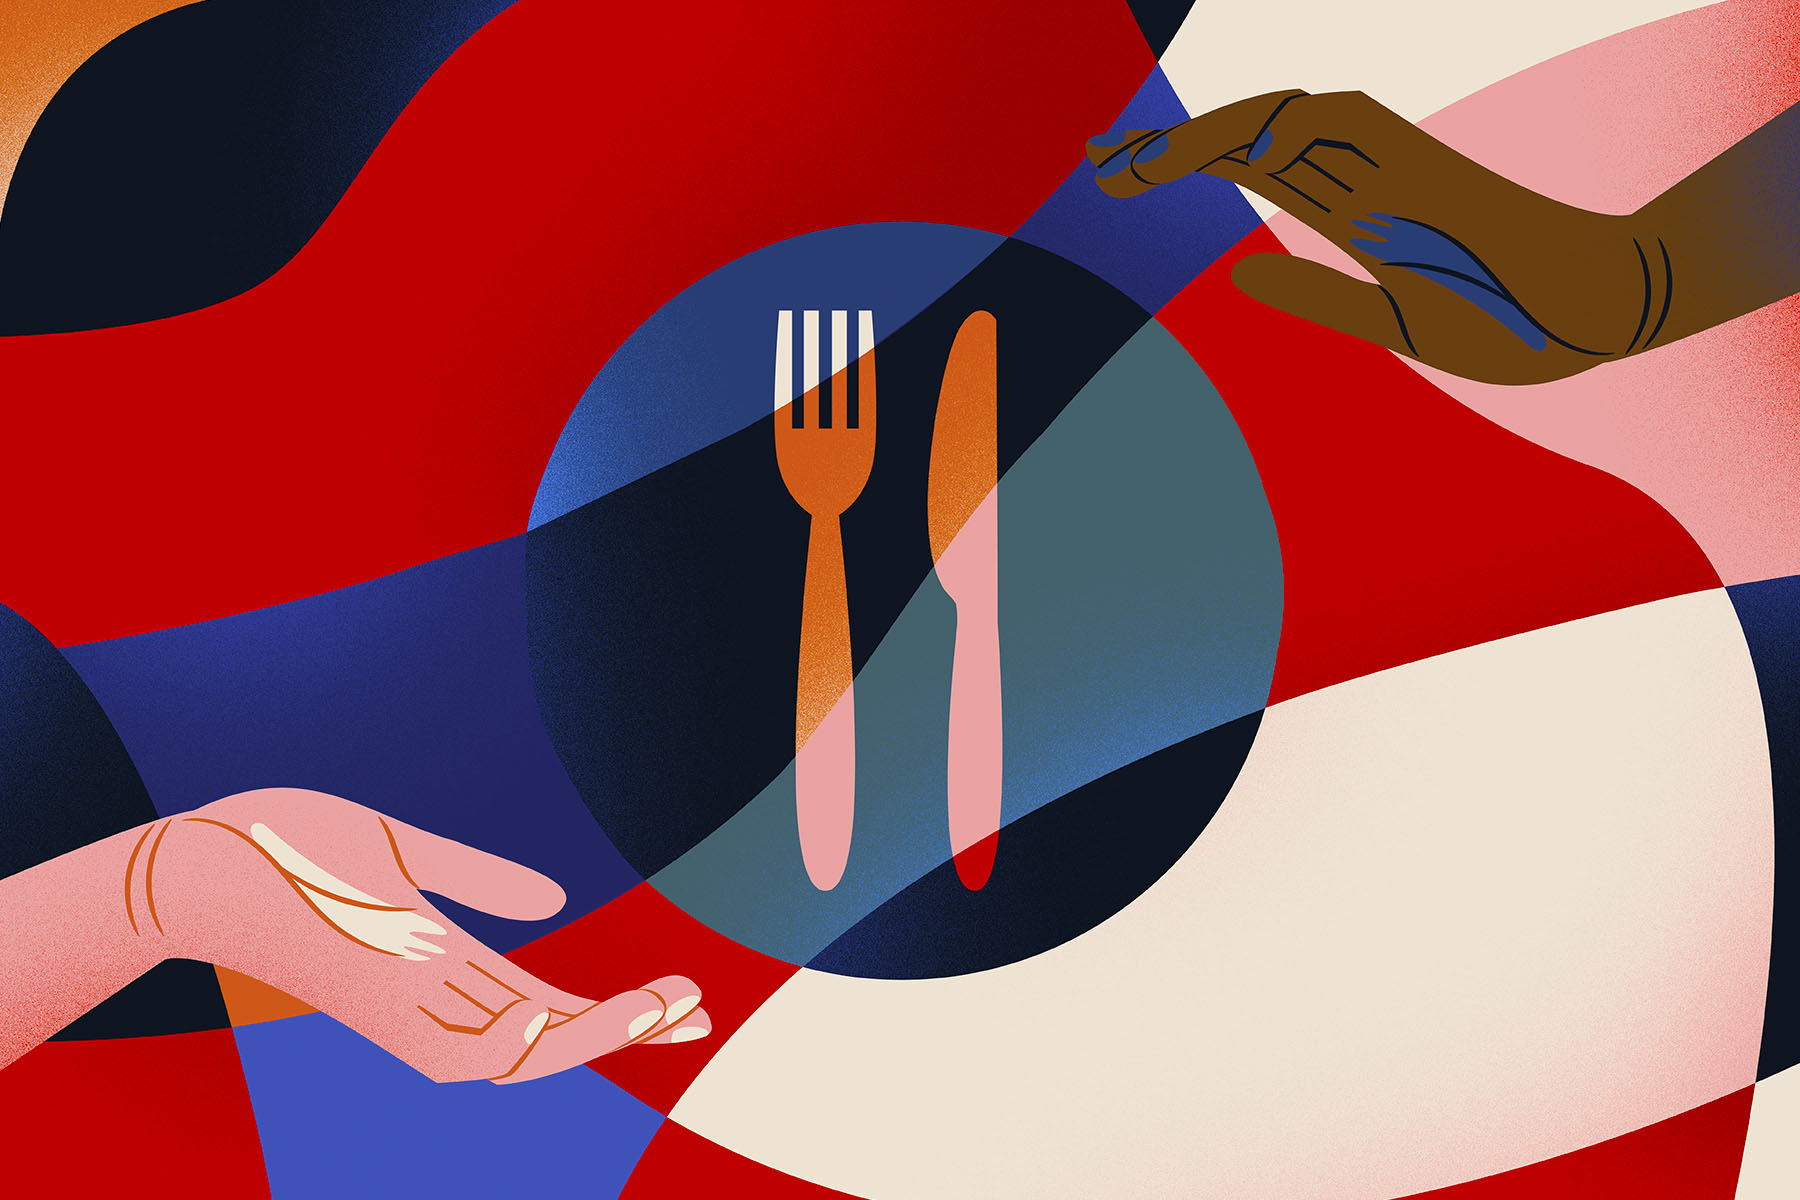 An illustration of a white hand and a brown hand coming together over a plate with a knife and fork on, against a multi-coloured background